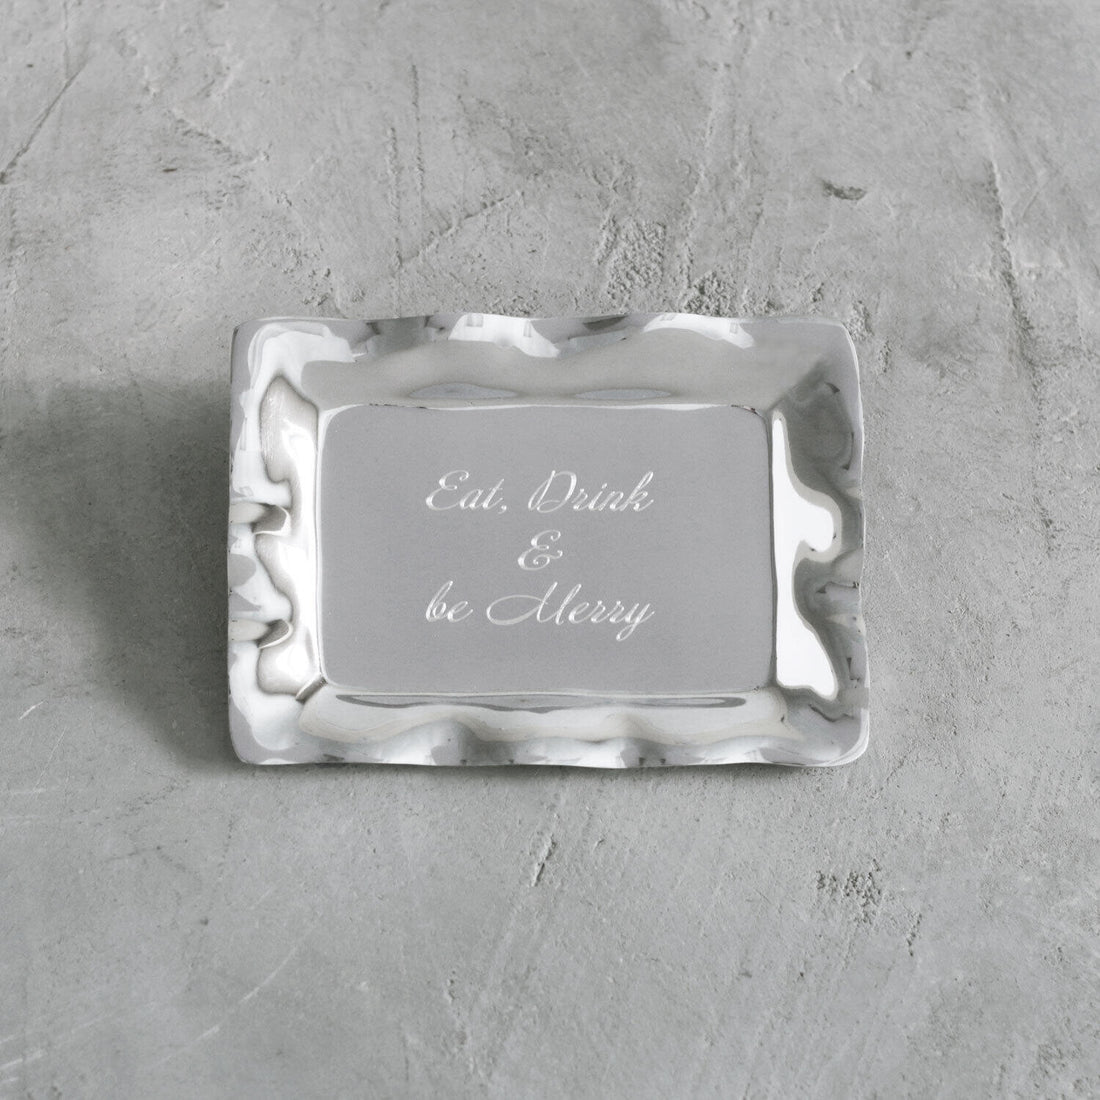 GIFTABLES Vento Rectangular Engraved Tray &quot;Eat, Drink &amp; be Merry&quot;